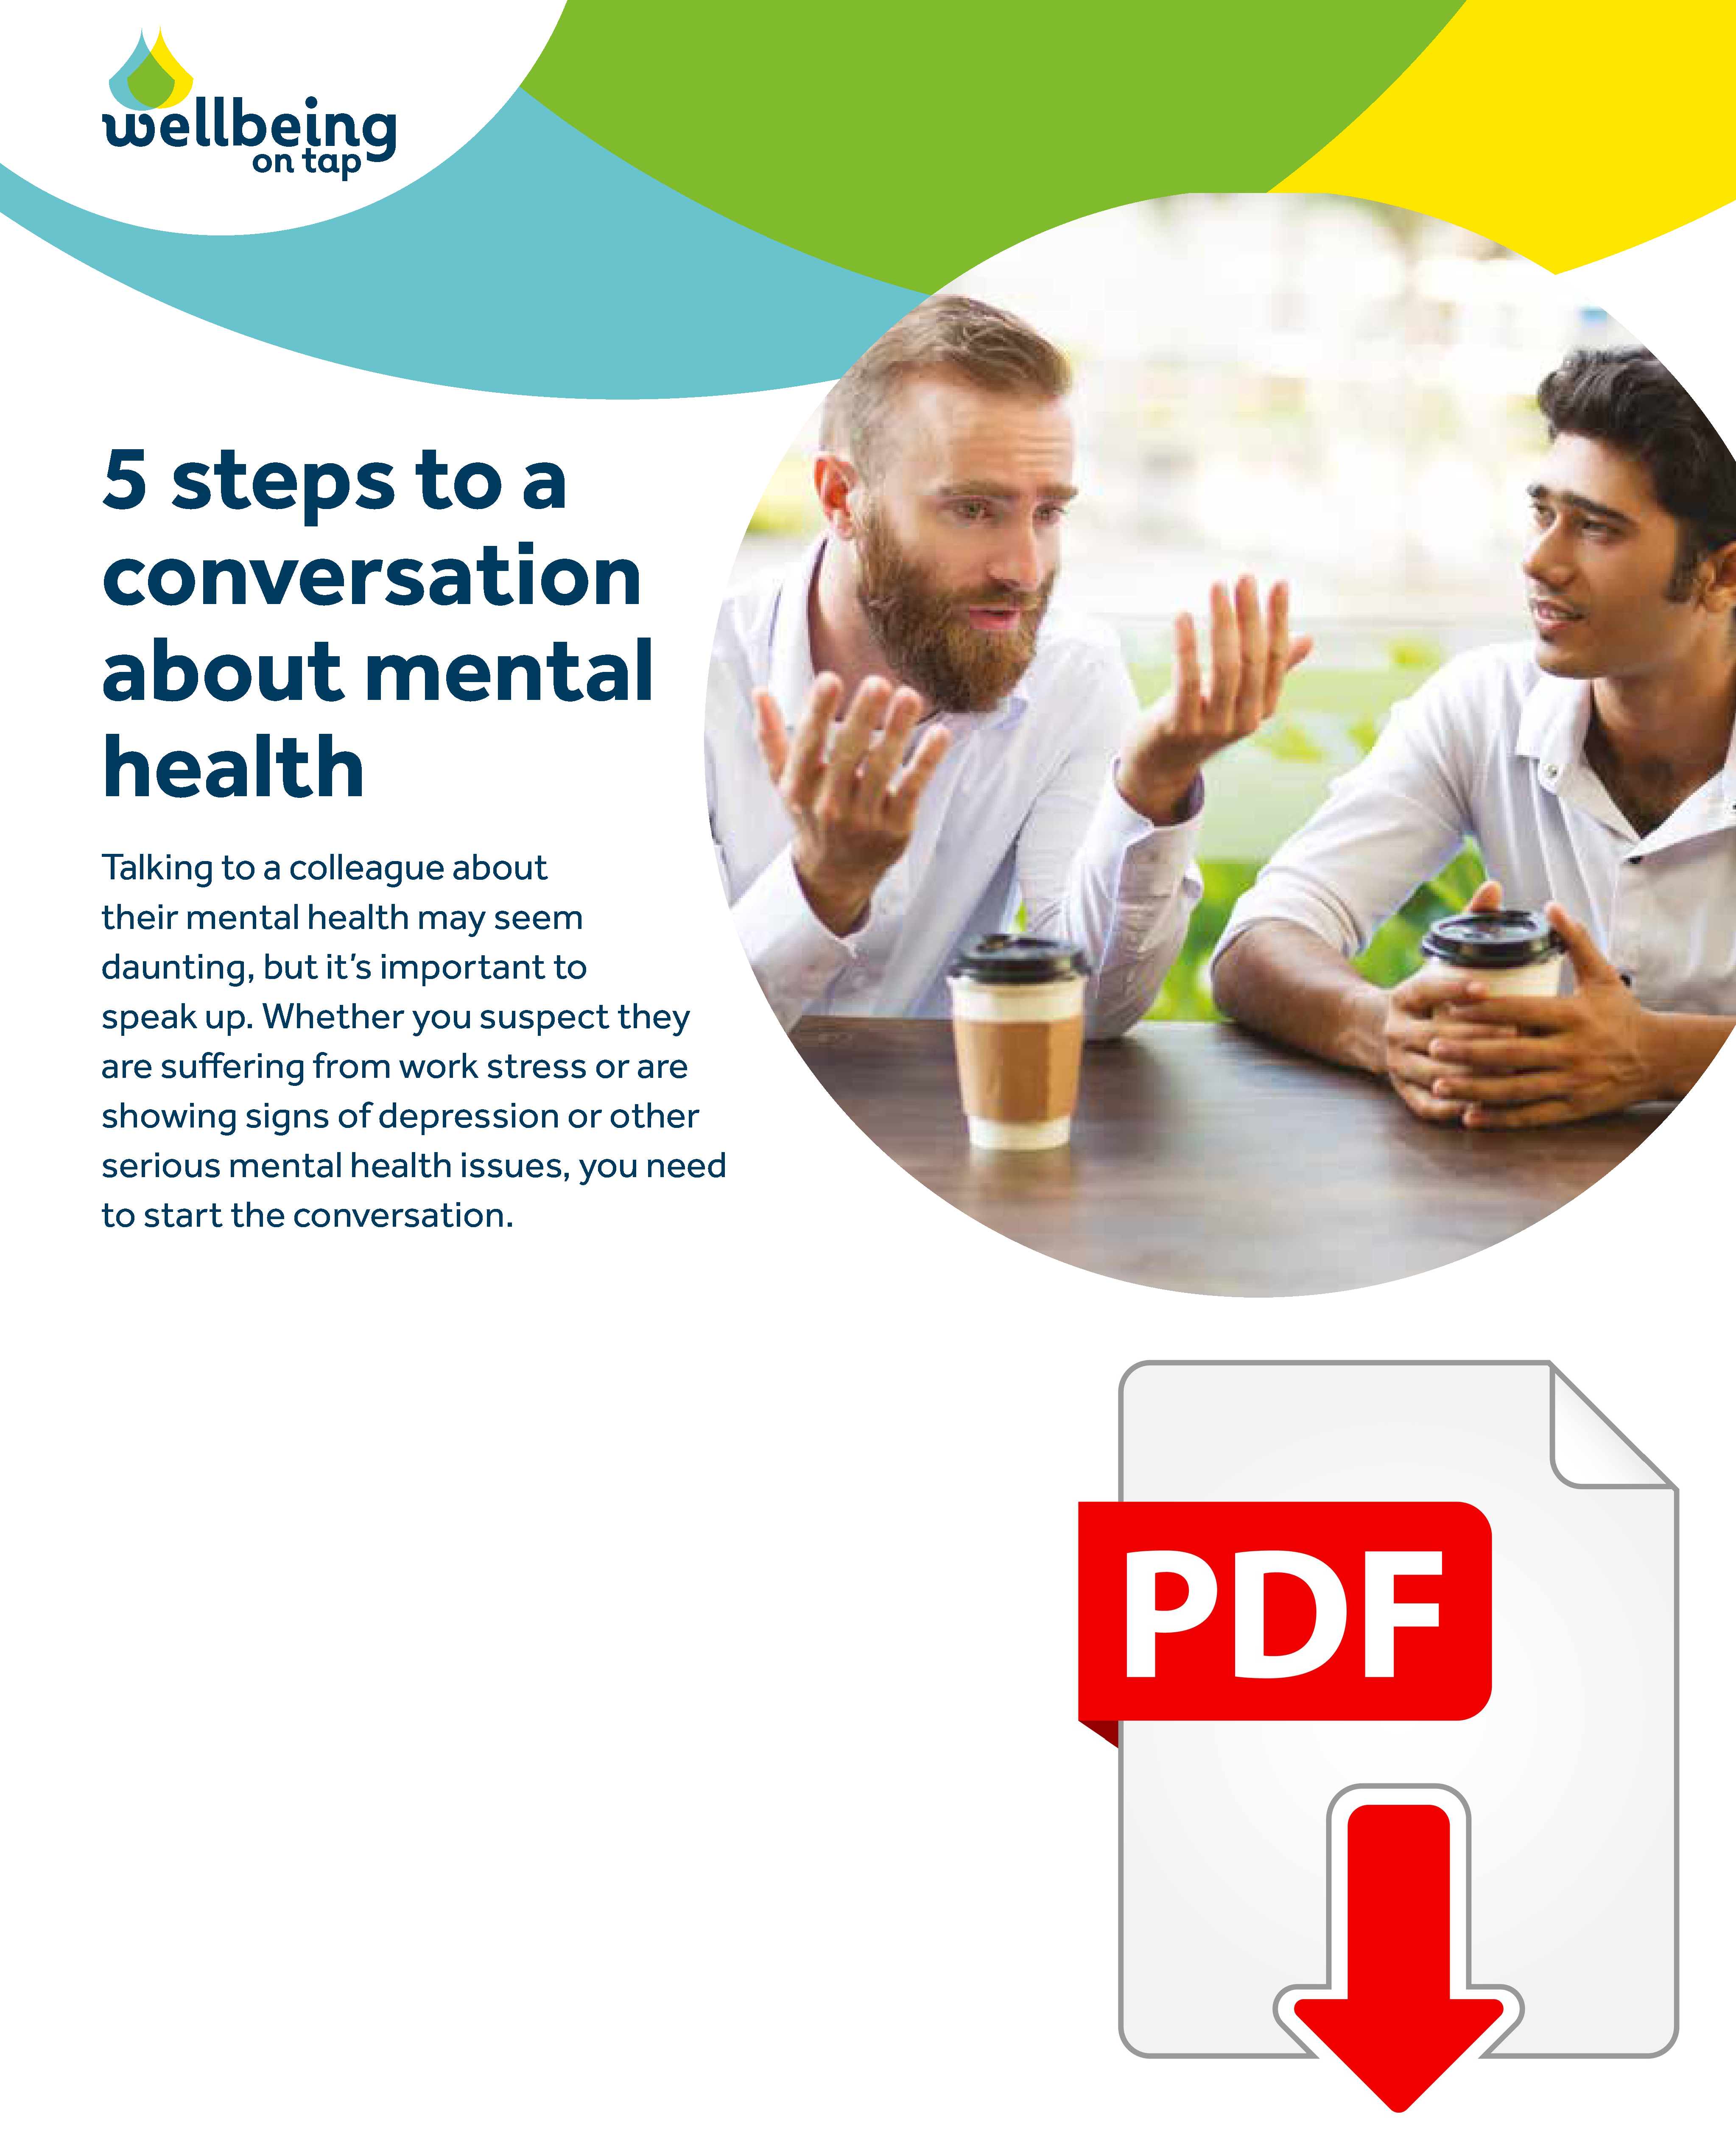 MP Wellbeing 5 steps to a conversation